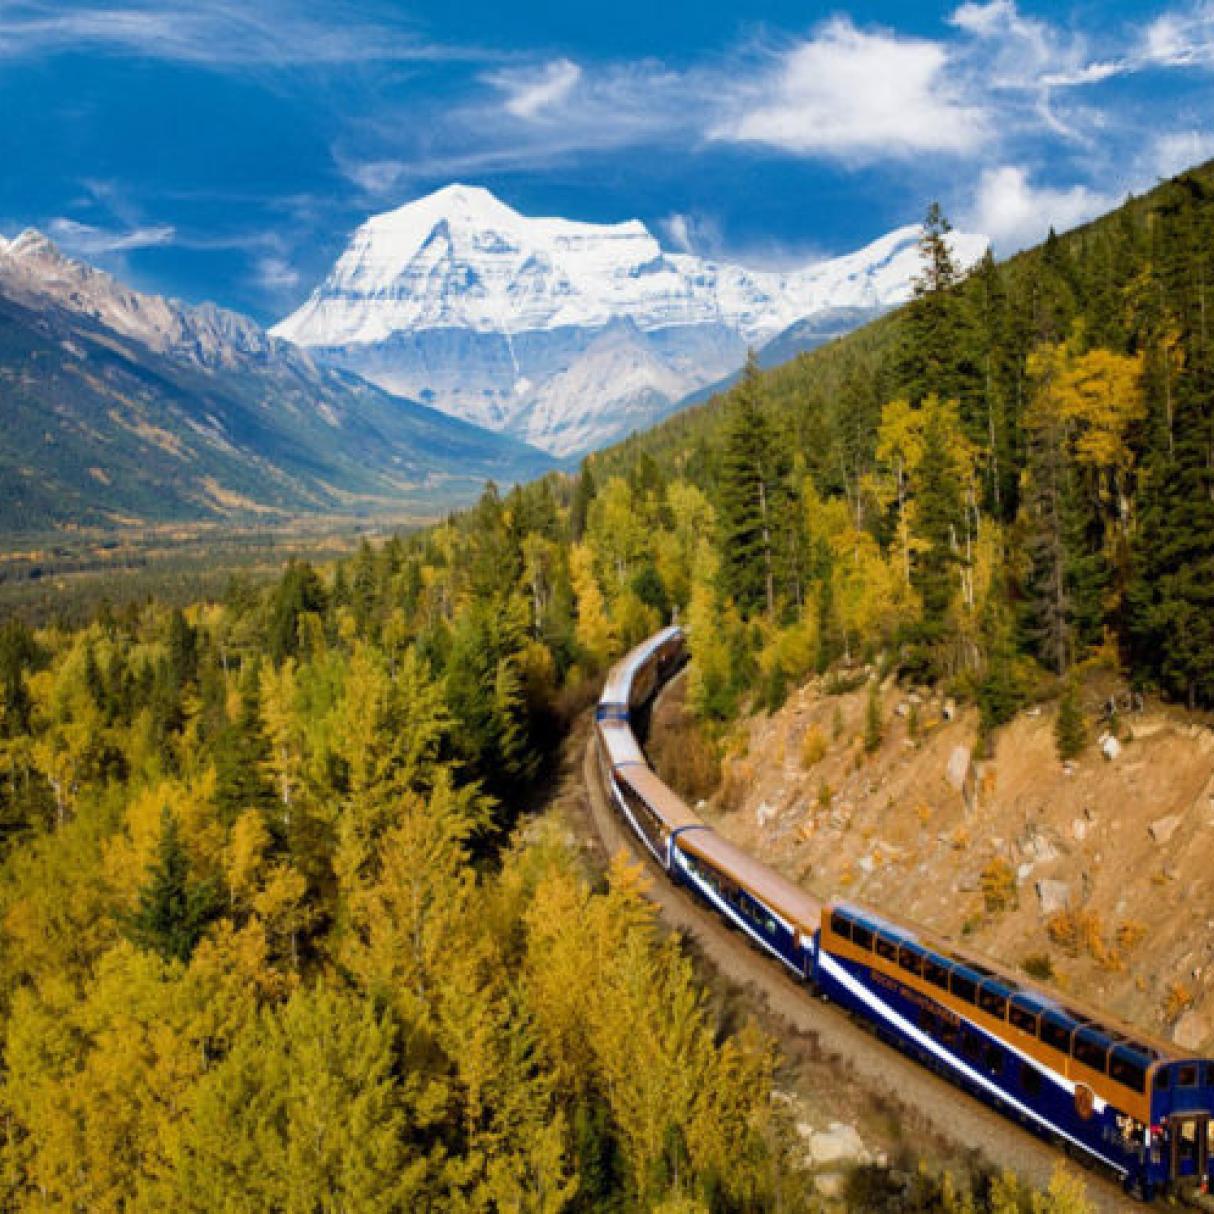 A train winds around a remote railway in the mountains, there are white capped mountains and forests in the surroundings.